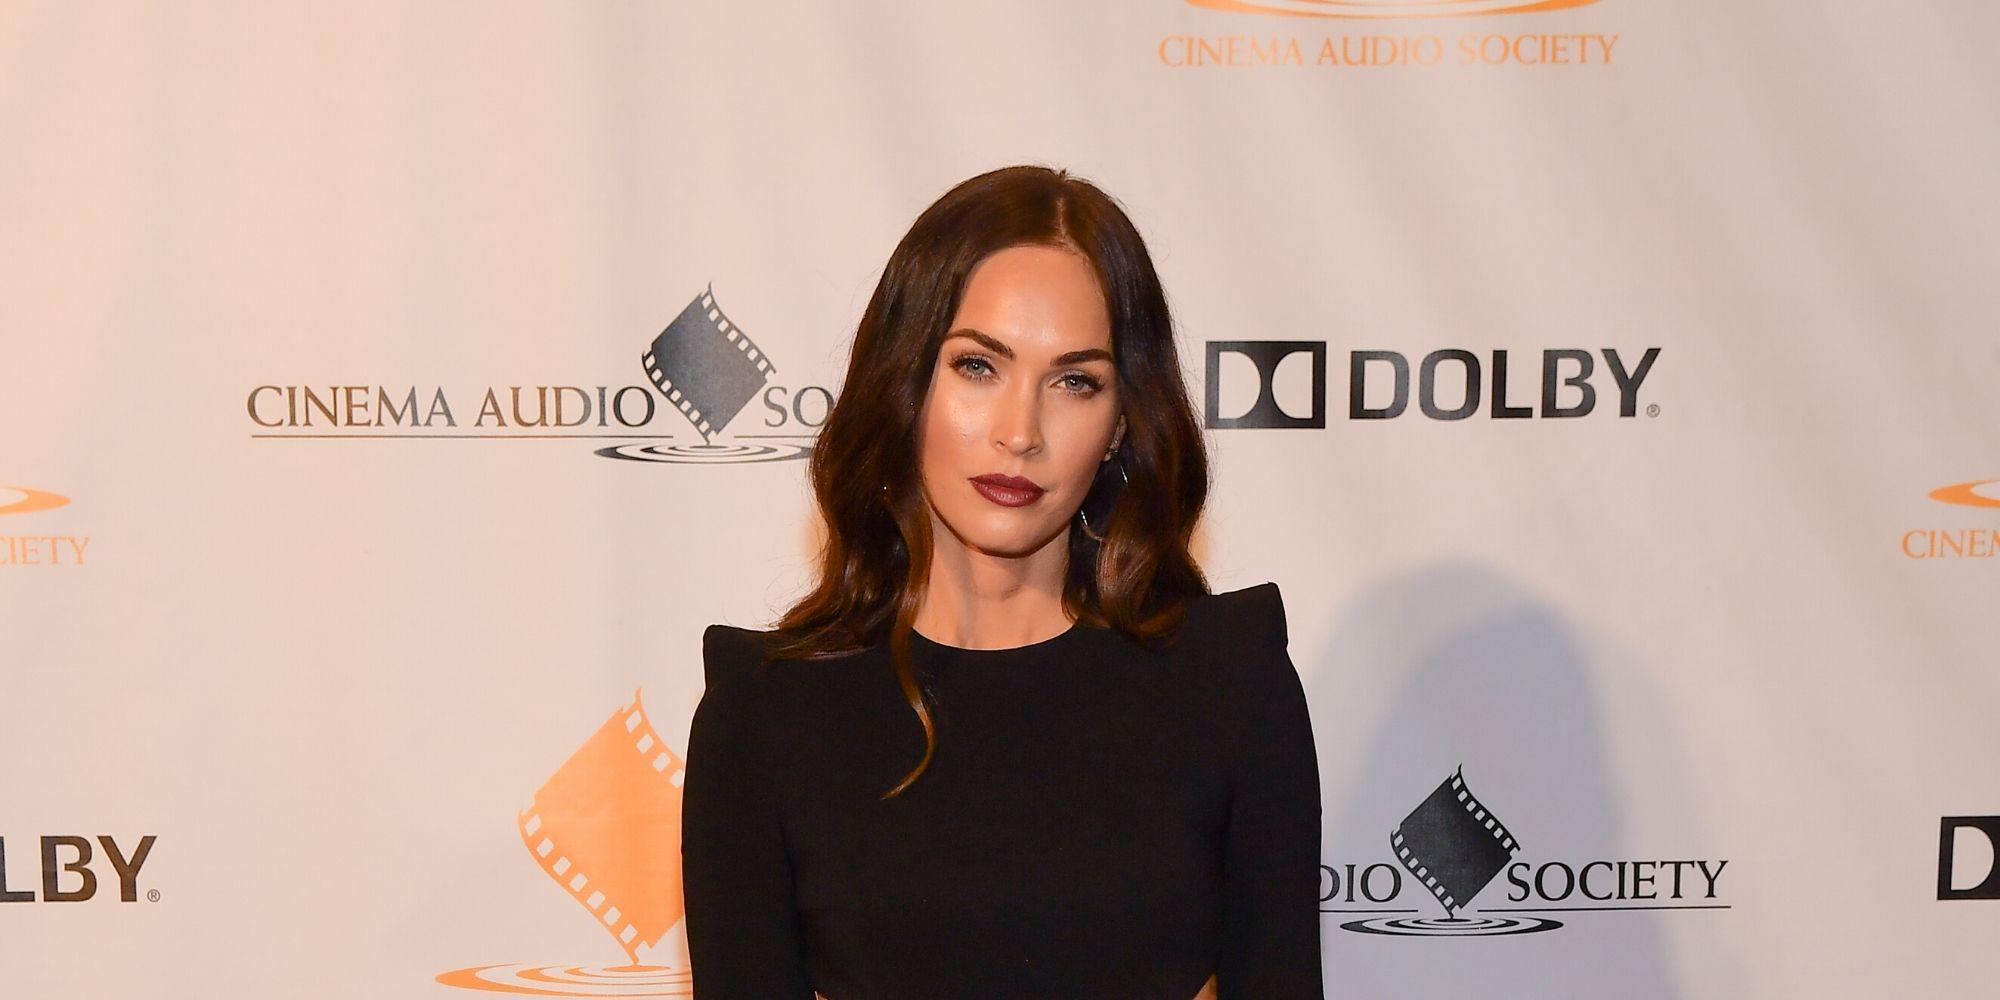 Megan Fox Releases Instagram Statement About Michael Bay And Sexism In